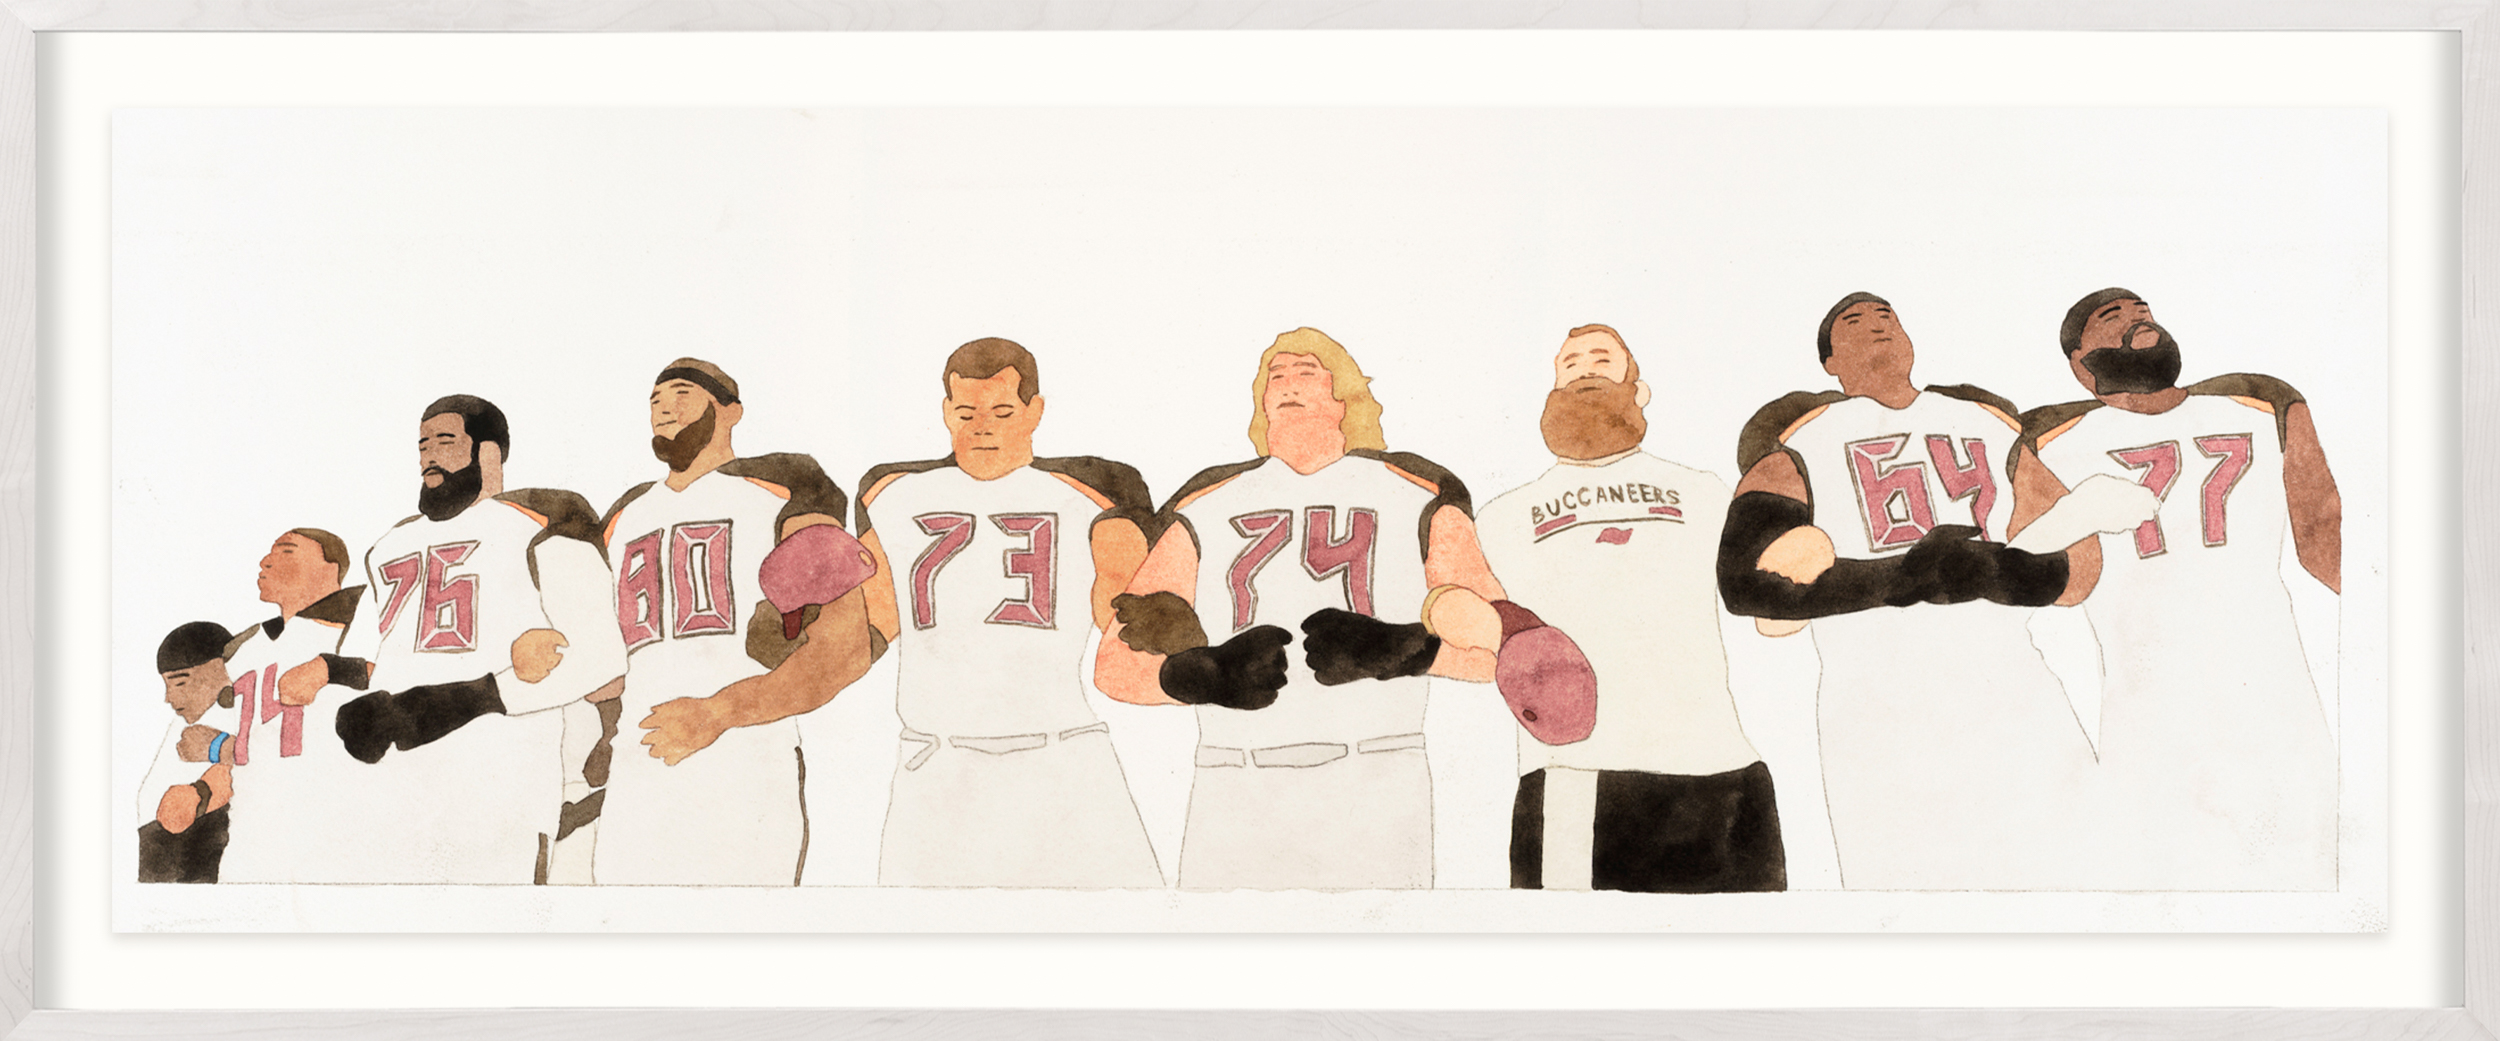 A color image of a framed watercolor painting depicting football players standing and locking arms during the national anthem